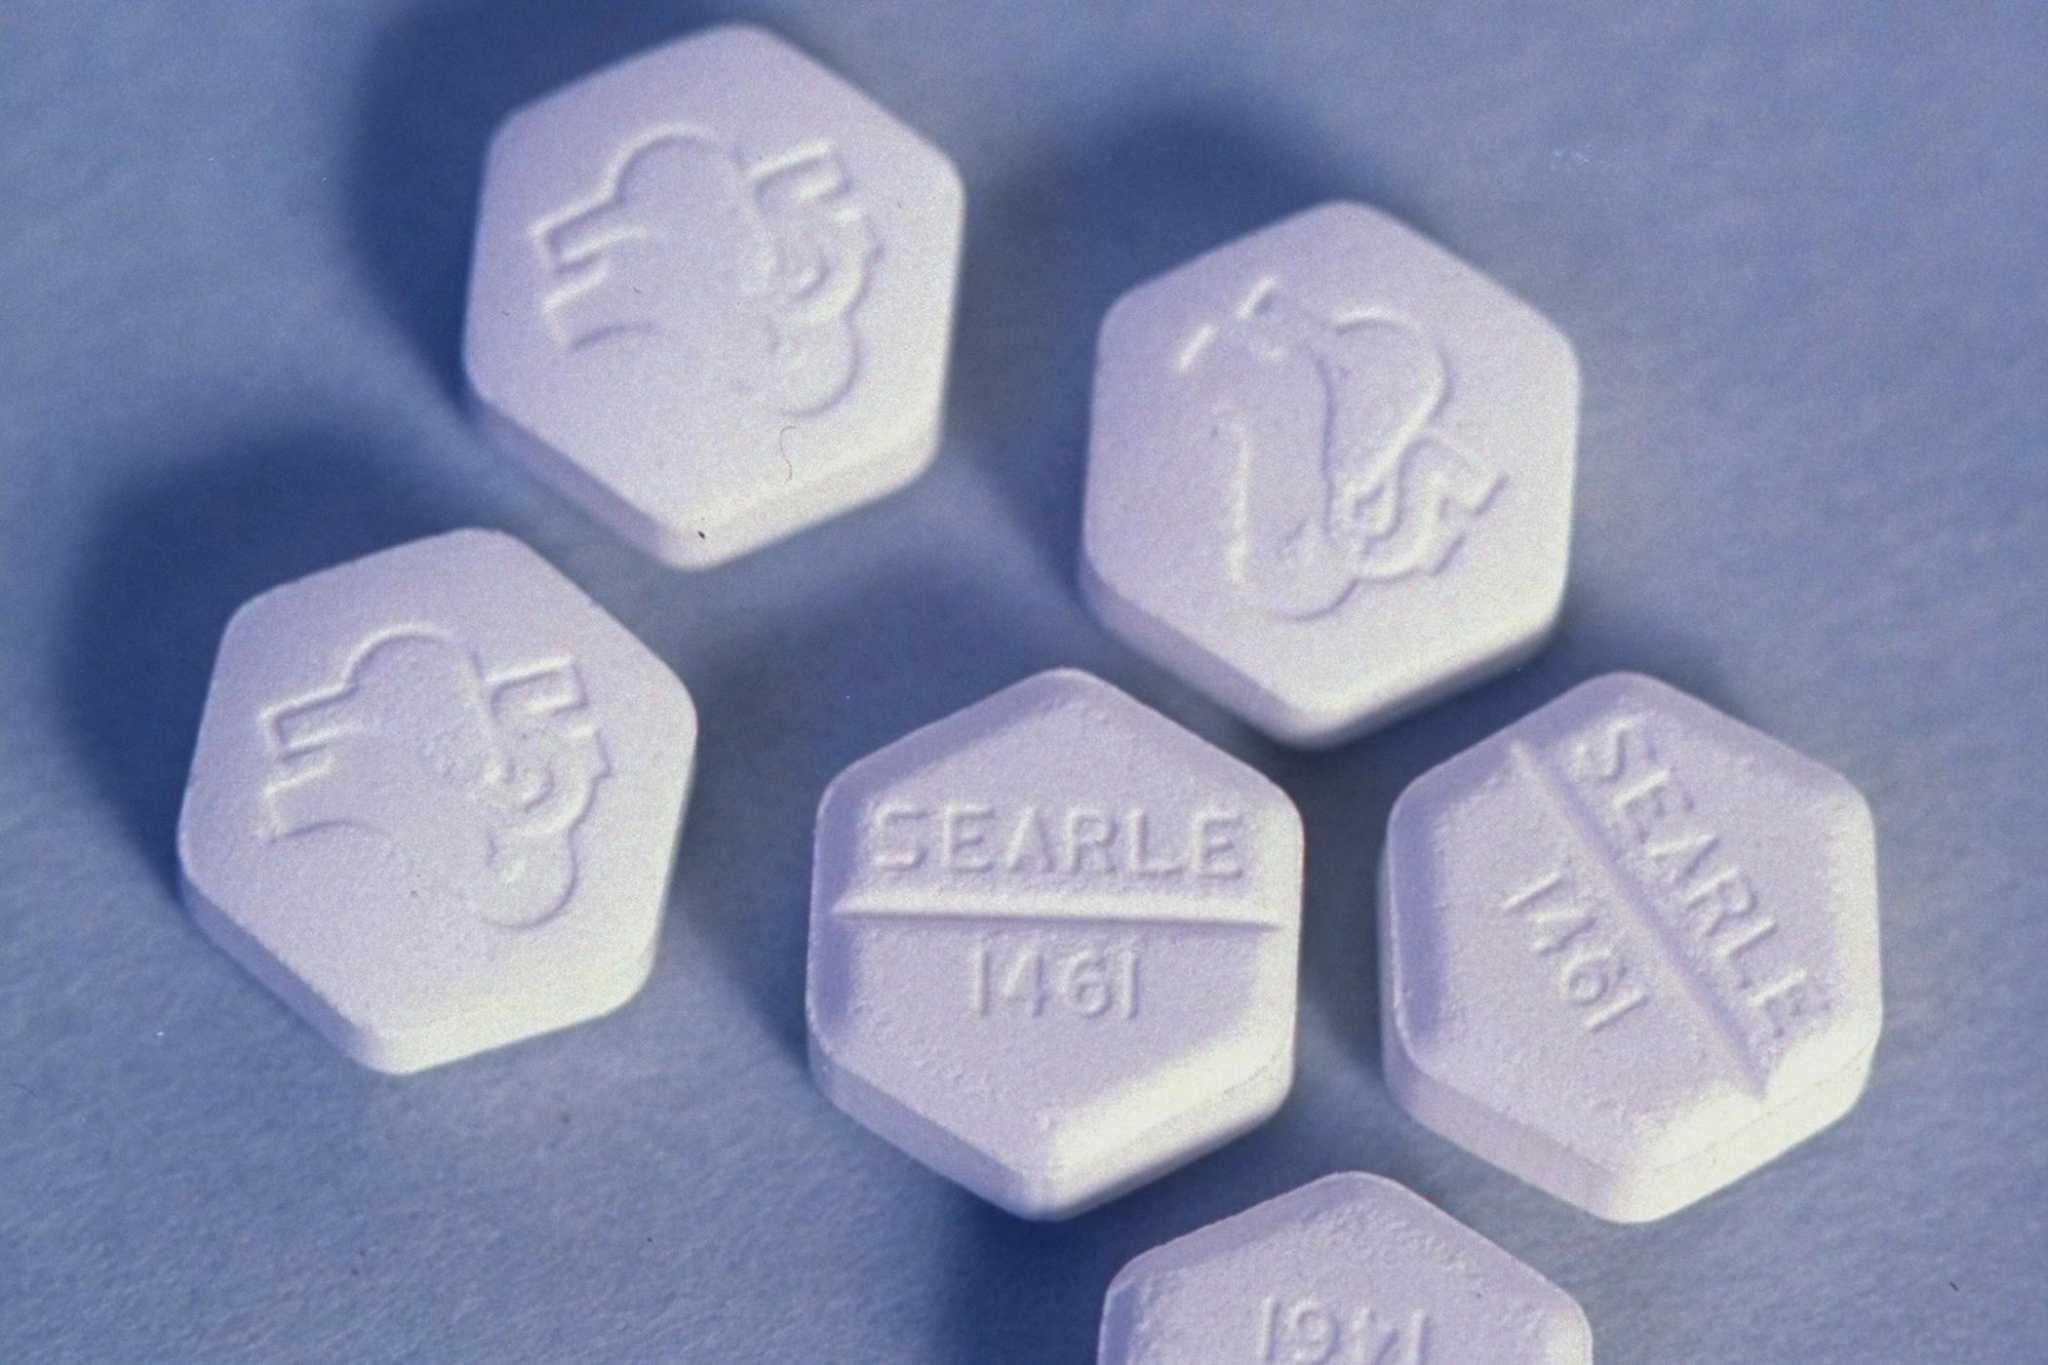 Searching for abortion pills? Here's how Google could search history that against you